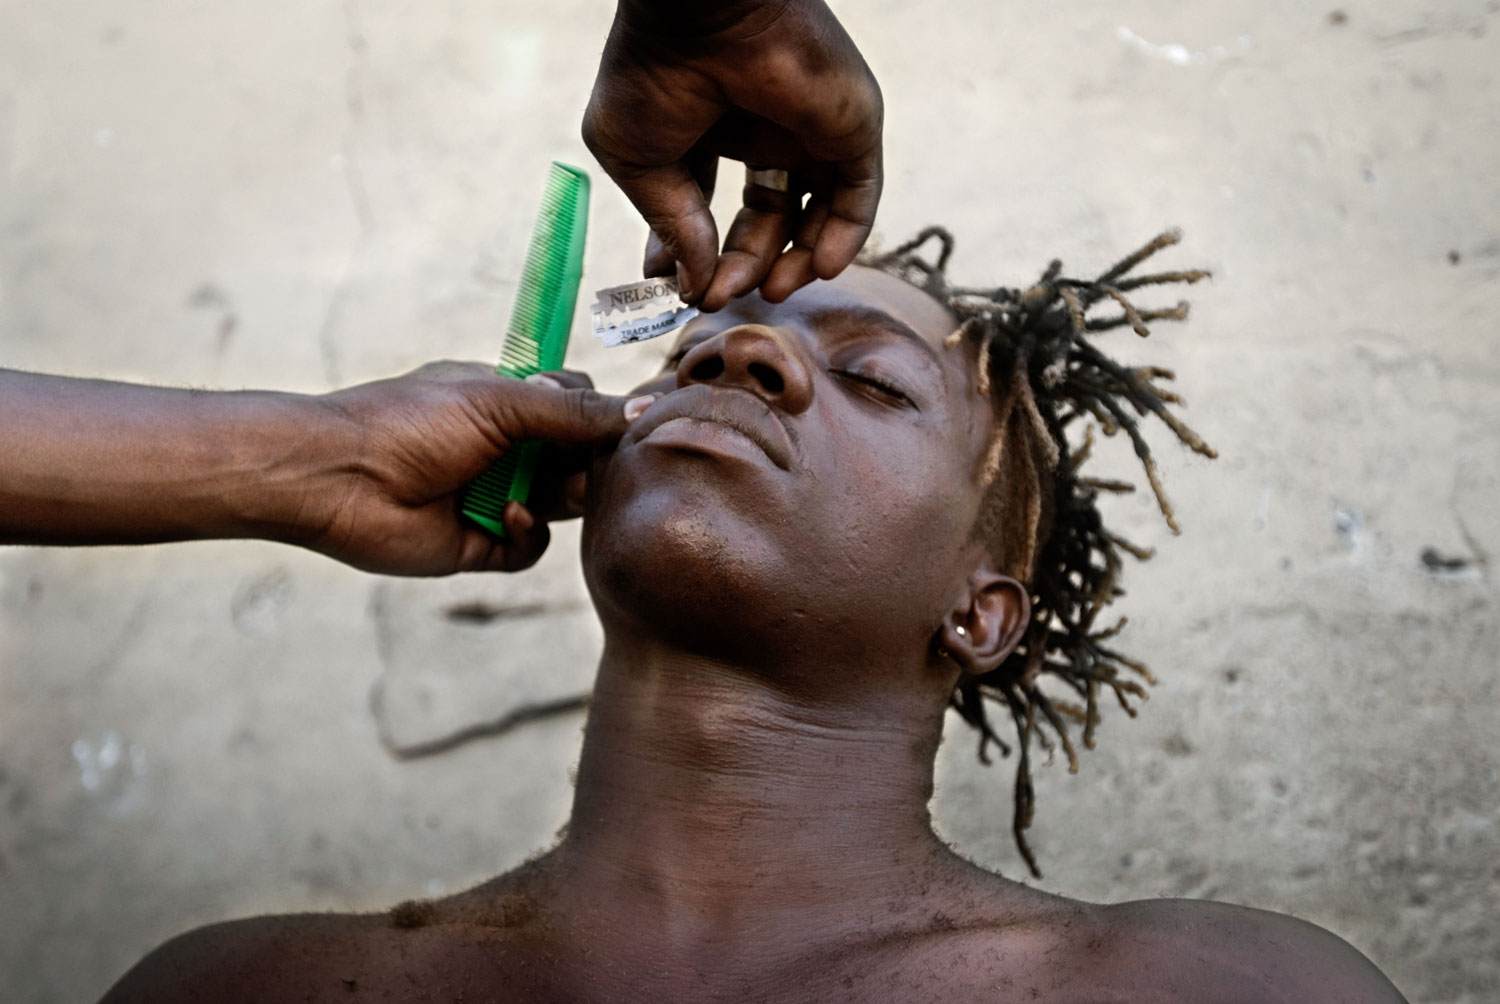 Mabokotomo, a popular young wrestler who competes in fetish and classic matches, is shaved at home in Matete district before a fight. The Congolese place great importance on their looks, and it's especially important for wrestlers to look their best before a fight.